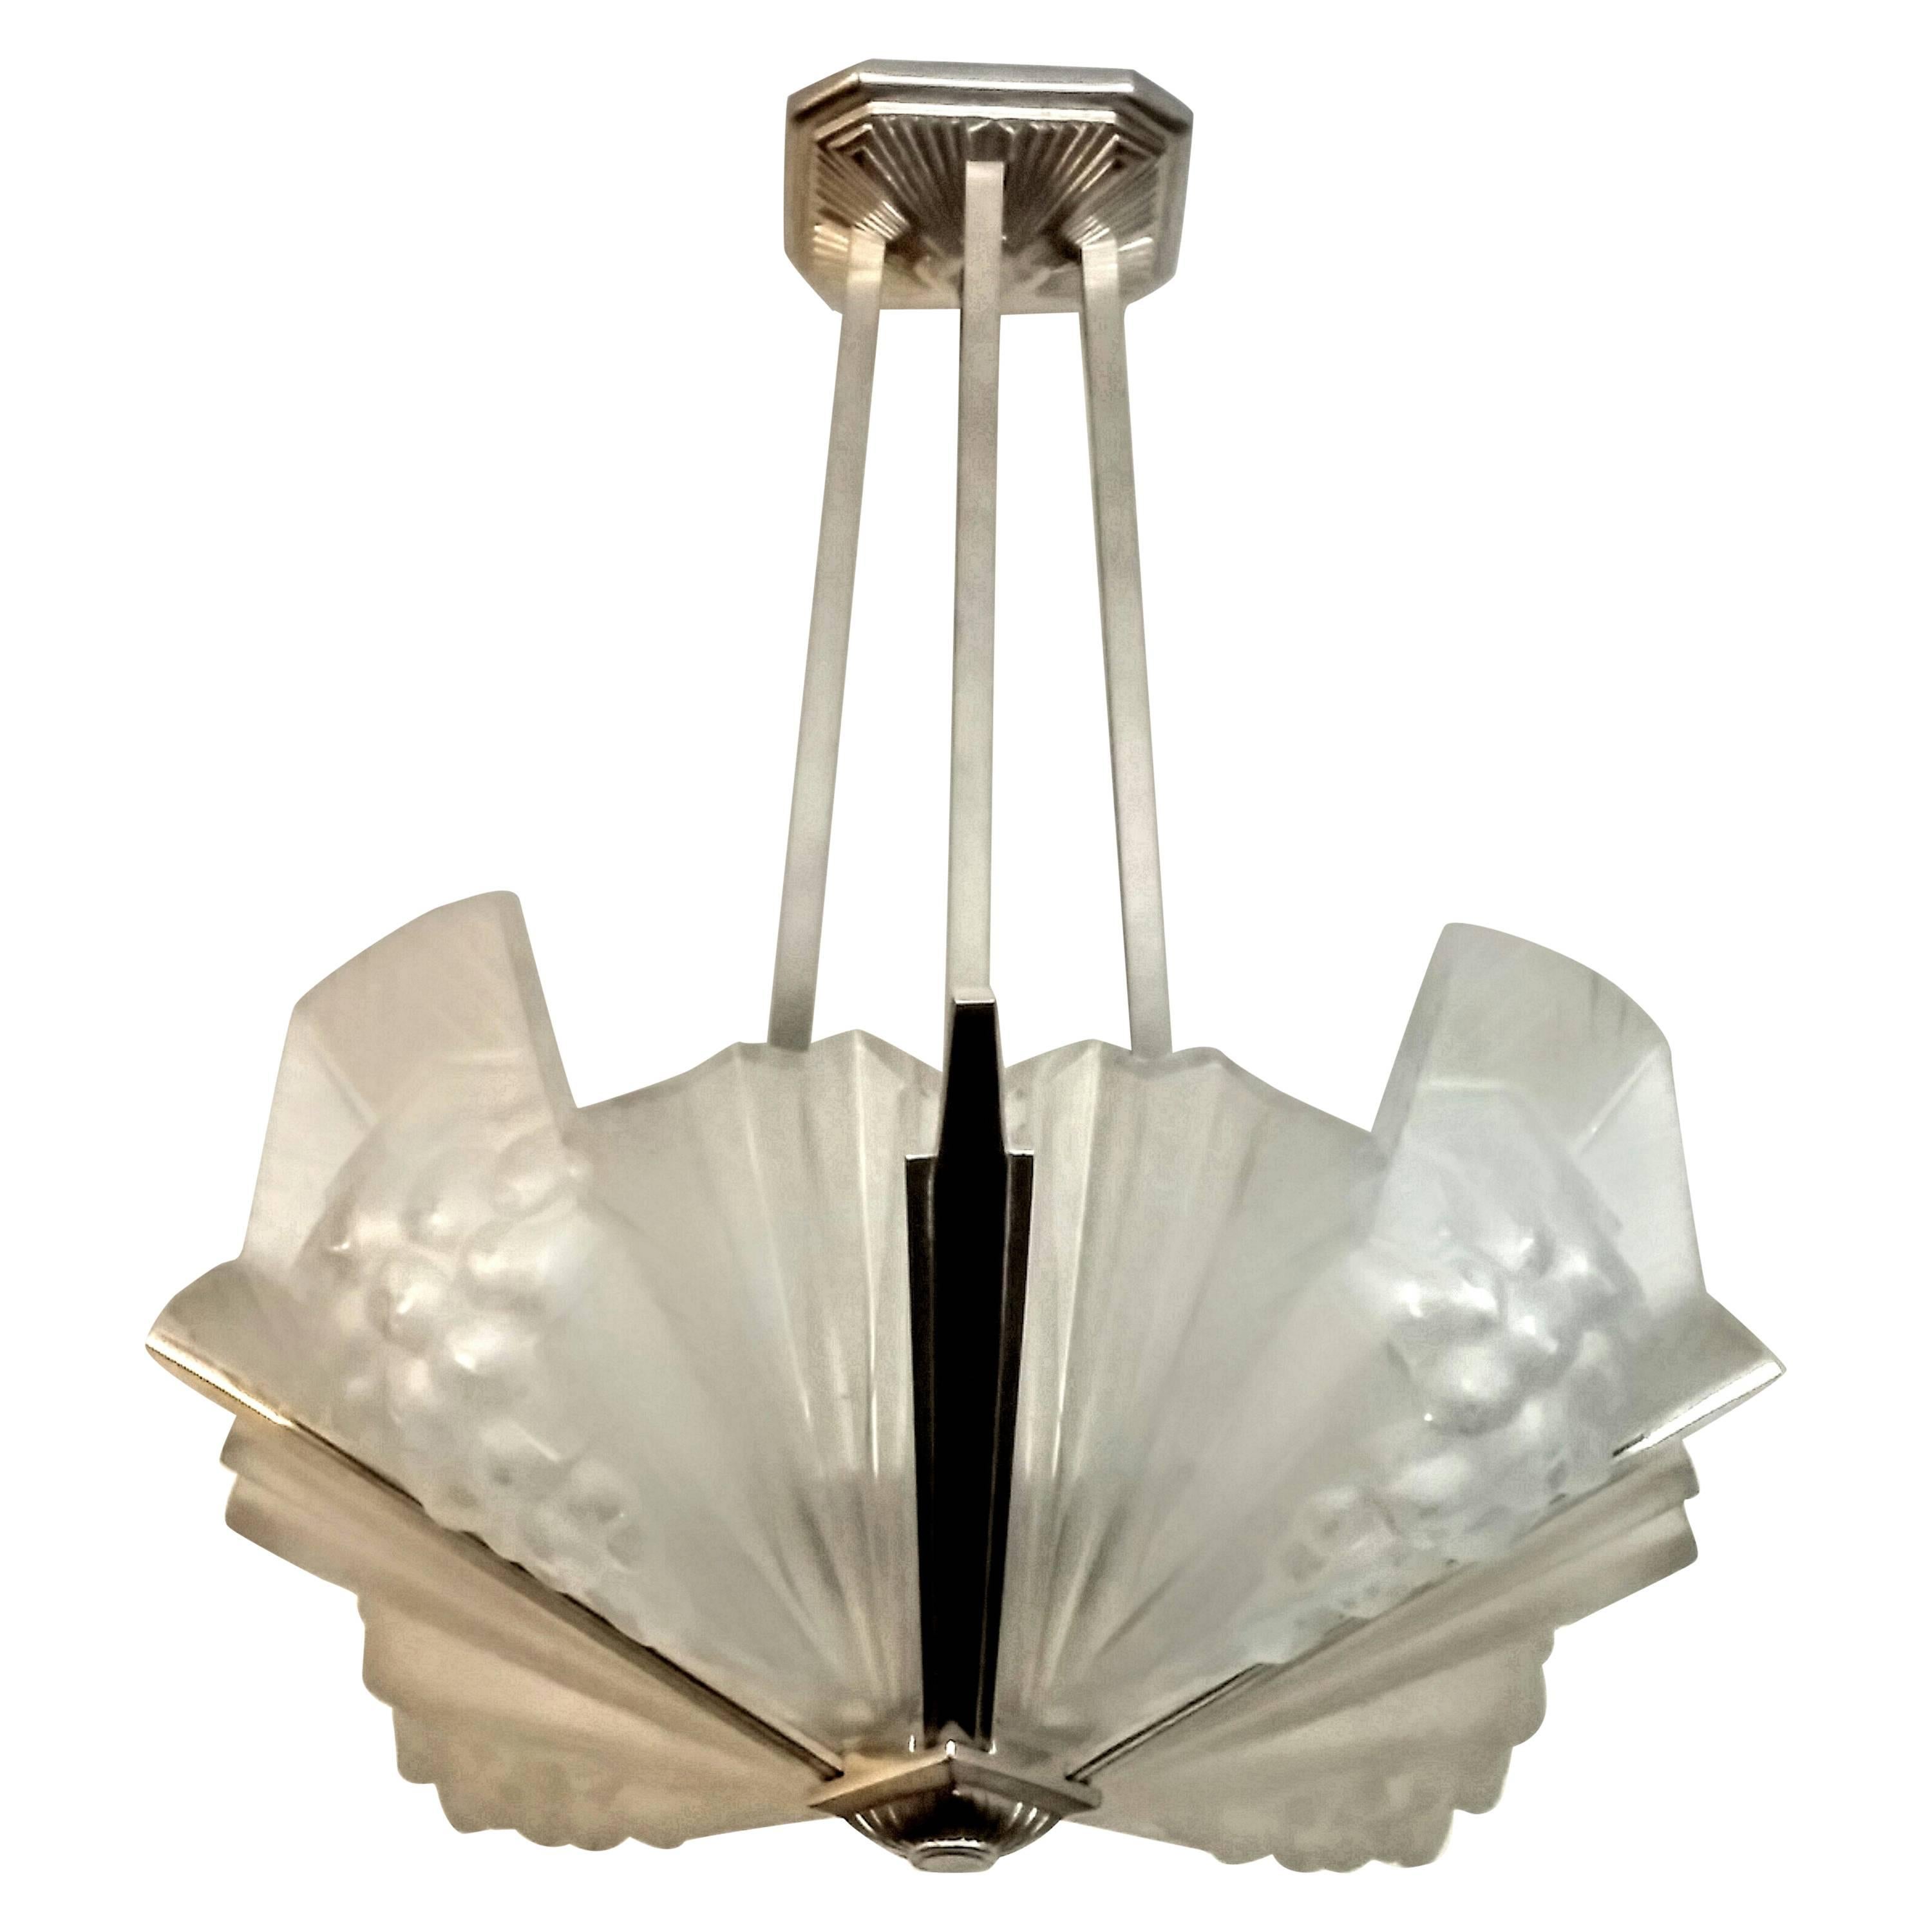 A French Art Deco Pendant Chandelier signed  by Atelier Petitot (Pair available)